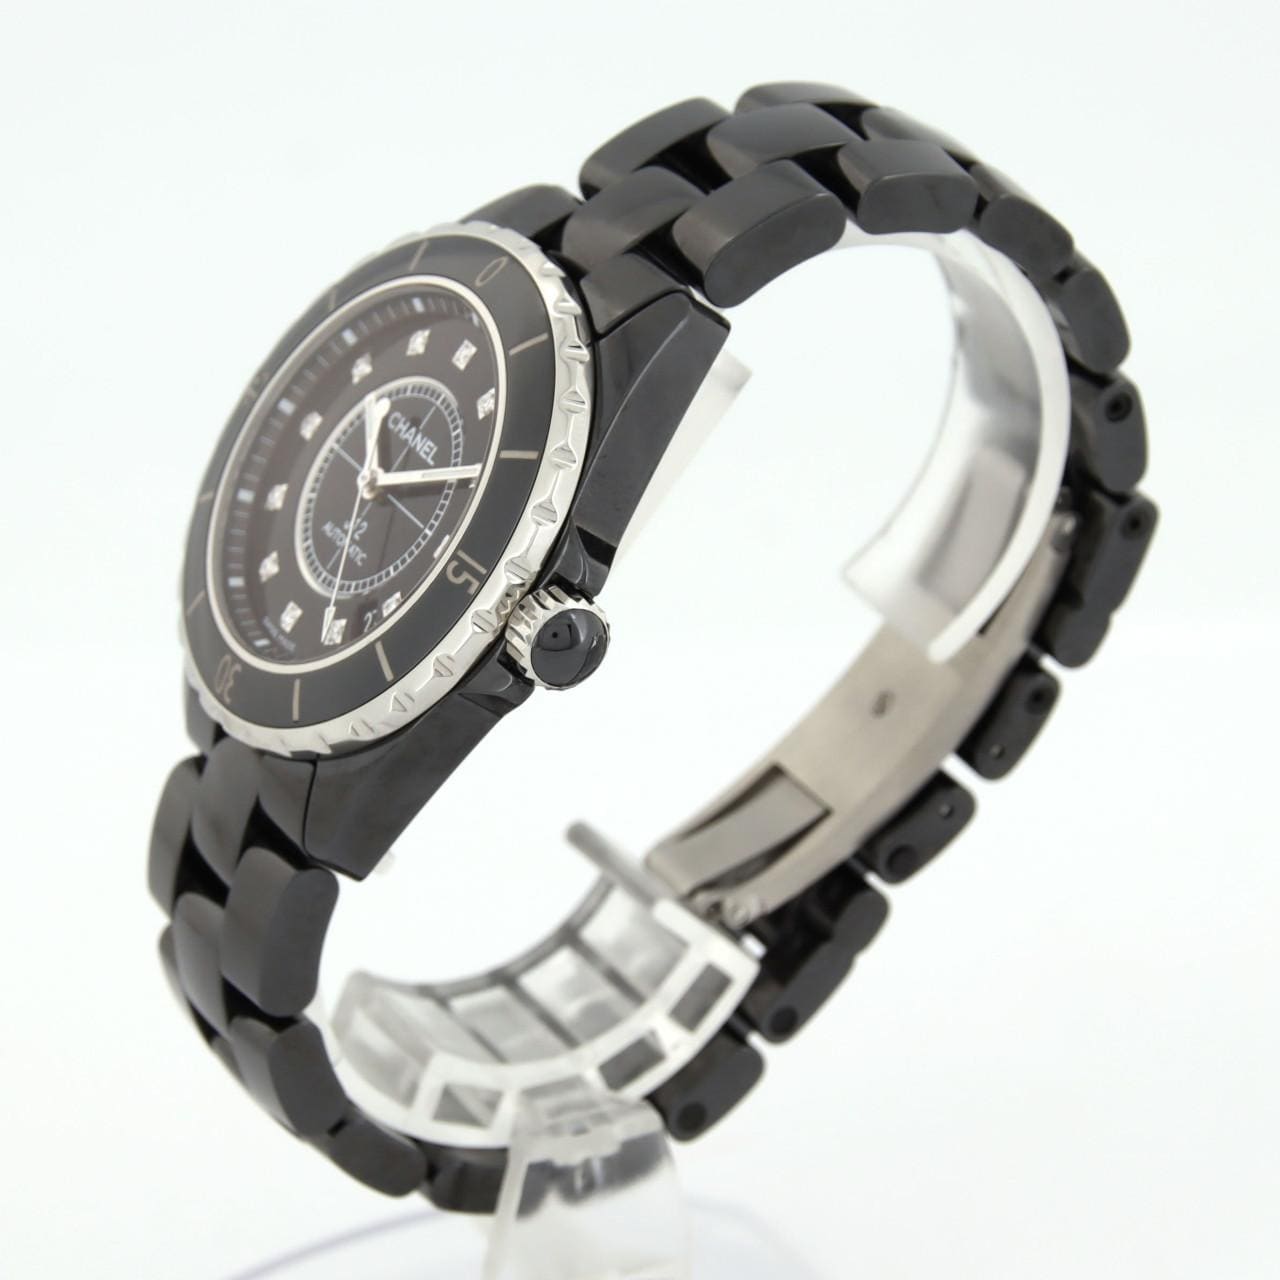 Chanel J12 Black Watches Collection Online At The Best Price - Geneve  Company